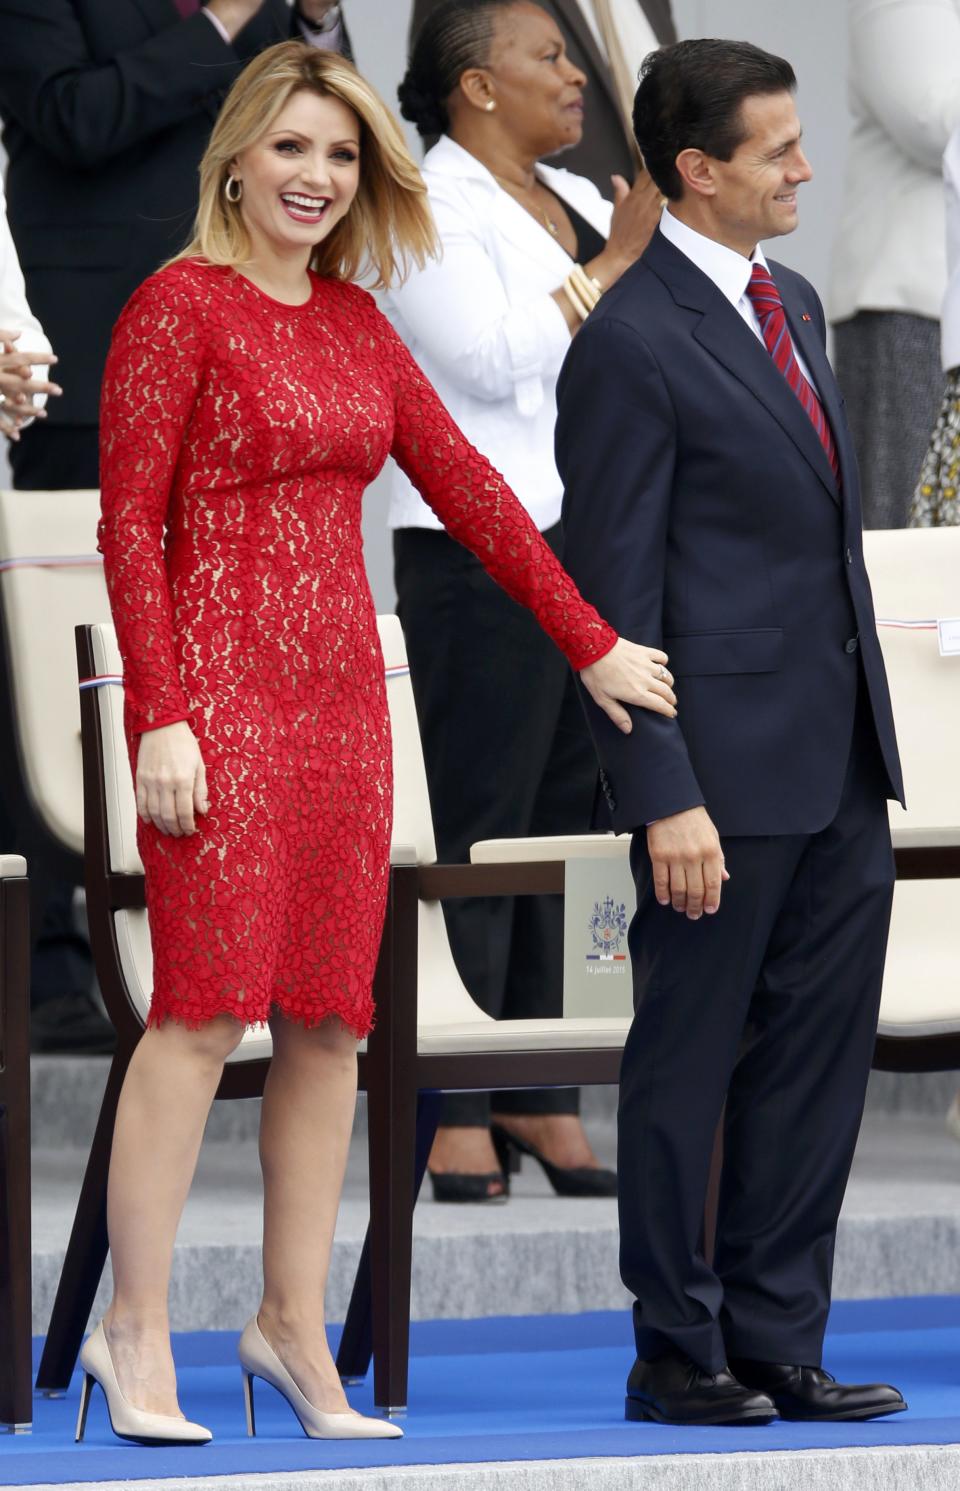 Mexico's President Enrique Pena Nieto and Mexico's First Lady Angelica Rivera arrive to attend the traditional Bastille Day military parade in Paris